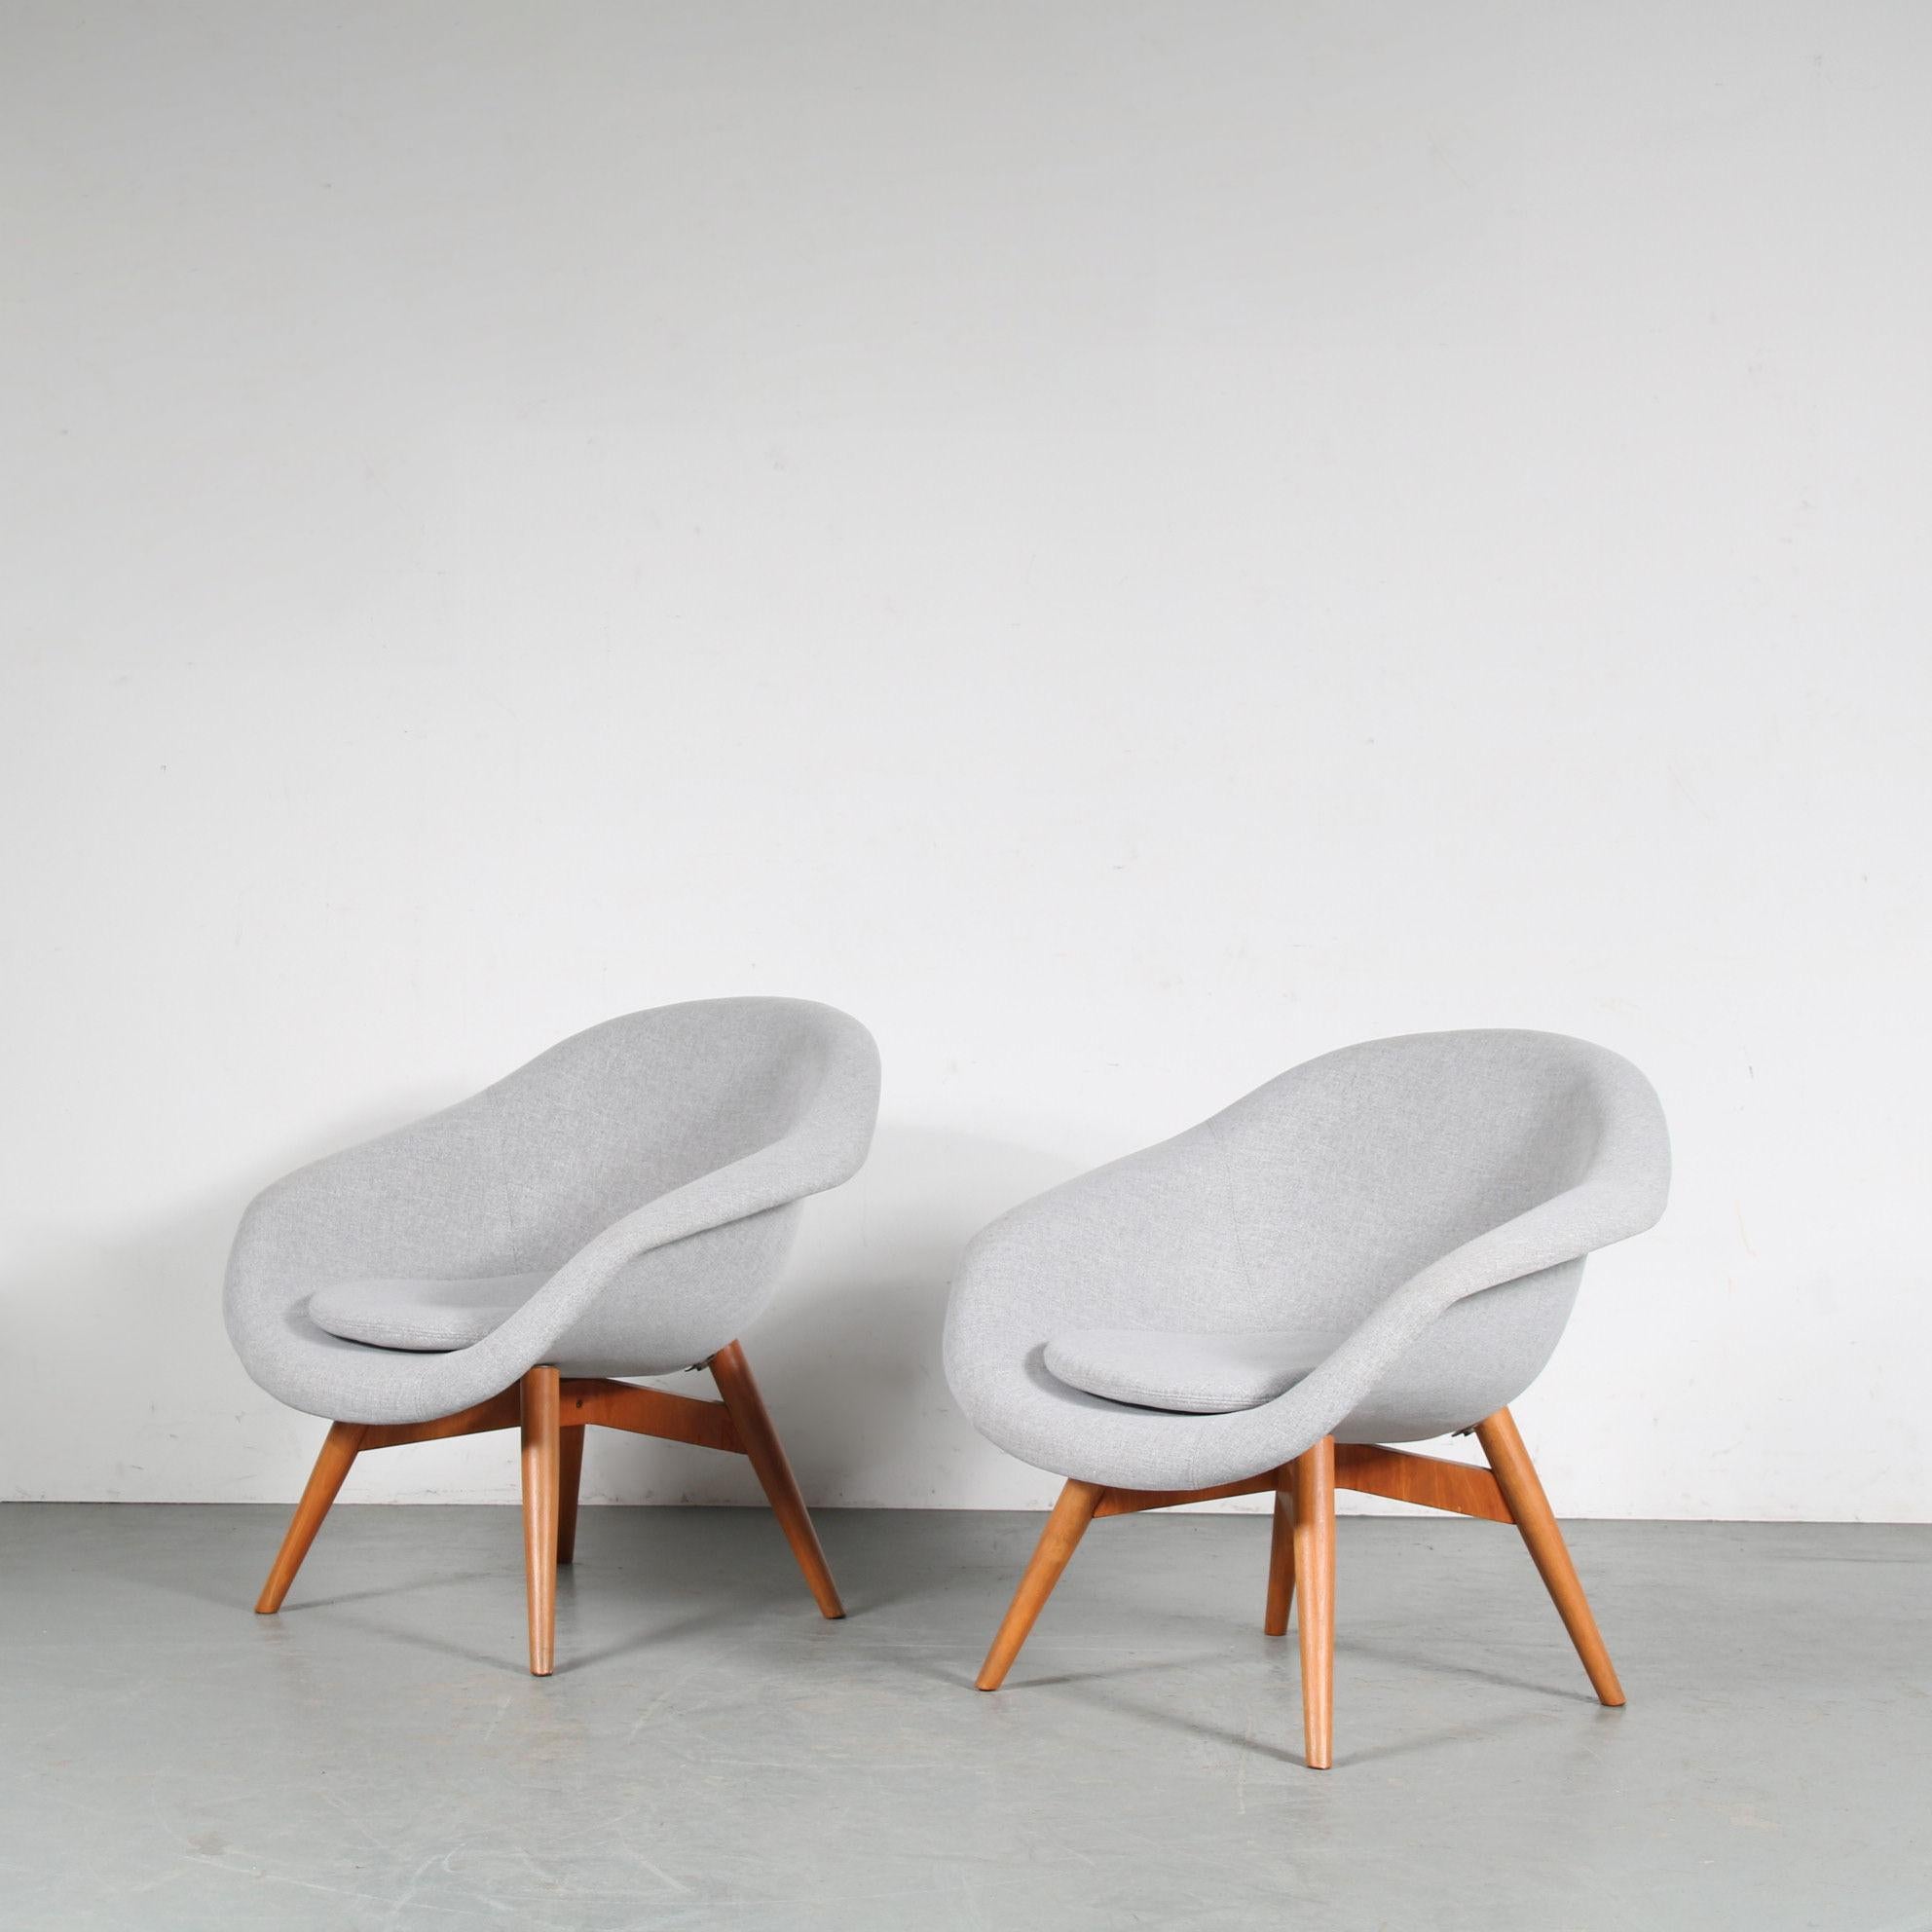 A fantastic pair of lounge chairs designed by Frantisek Jirak, manufactured in the Czech Repulbic around 1950.

These eye-catching chairs have high quality beech wooden bases in a nice, warm brown colour. The tapered legs give them a nice, modern